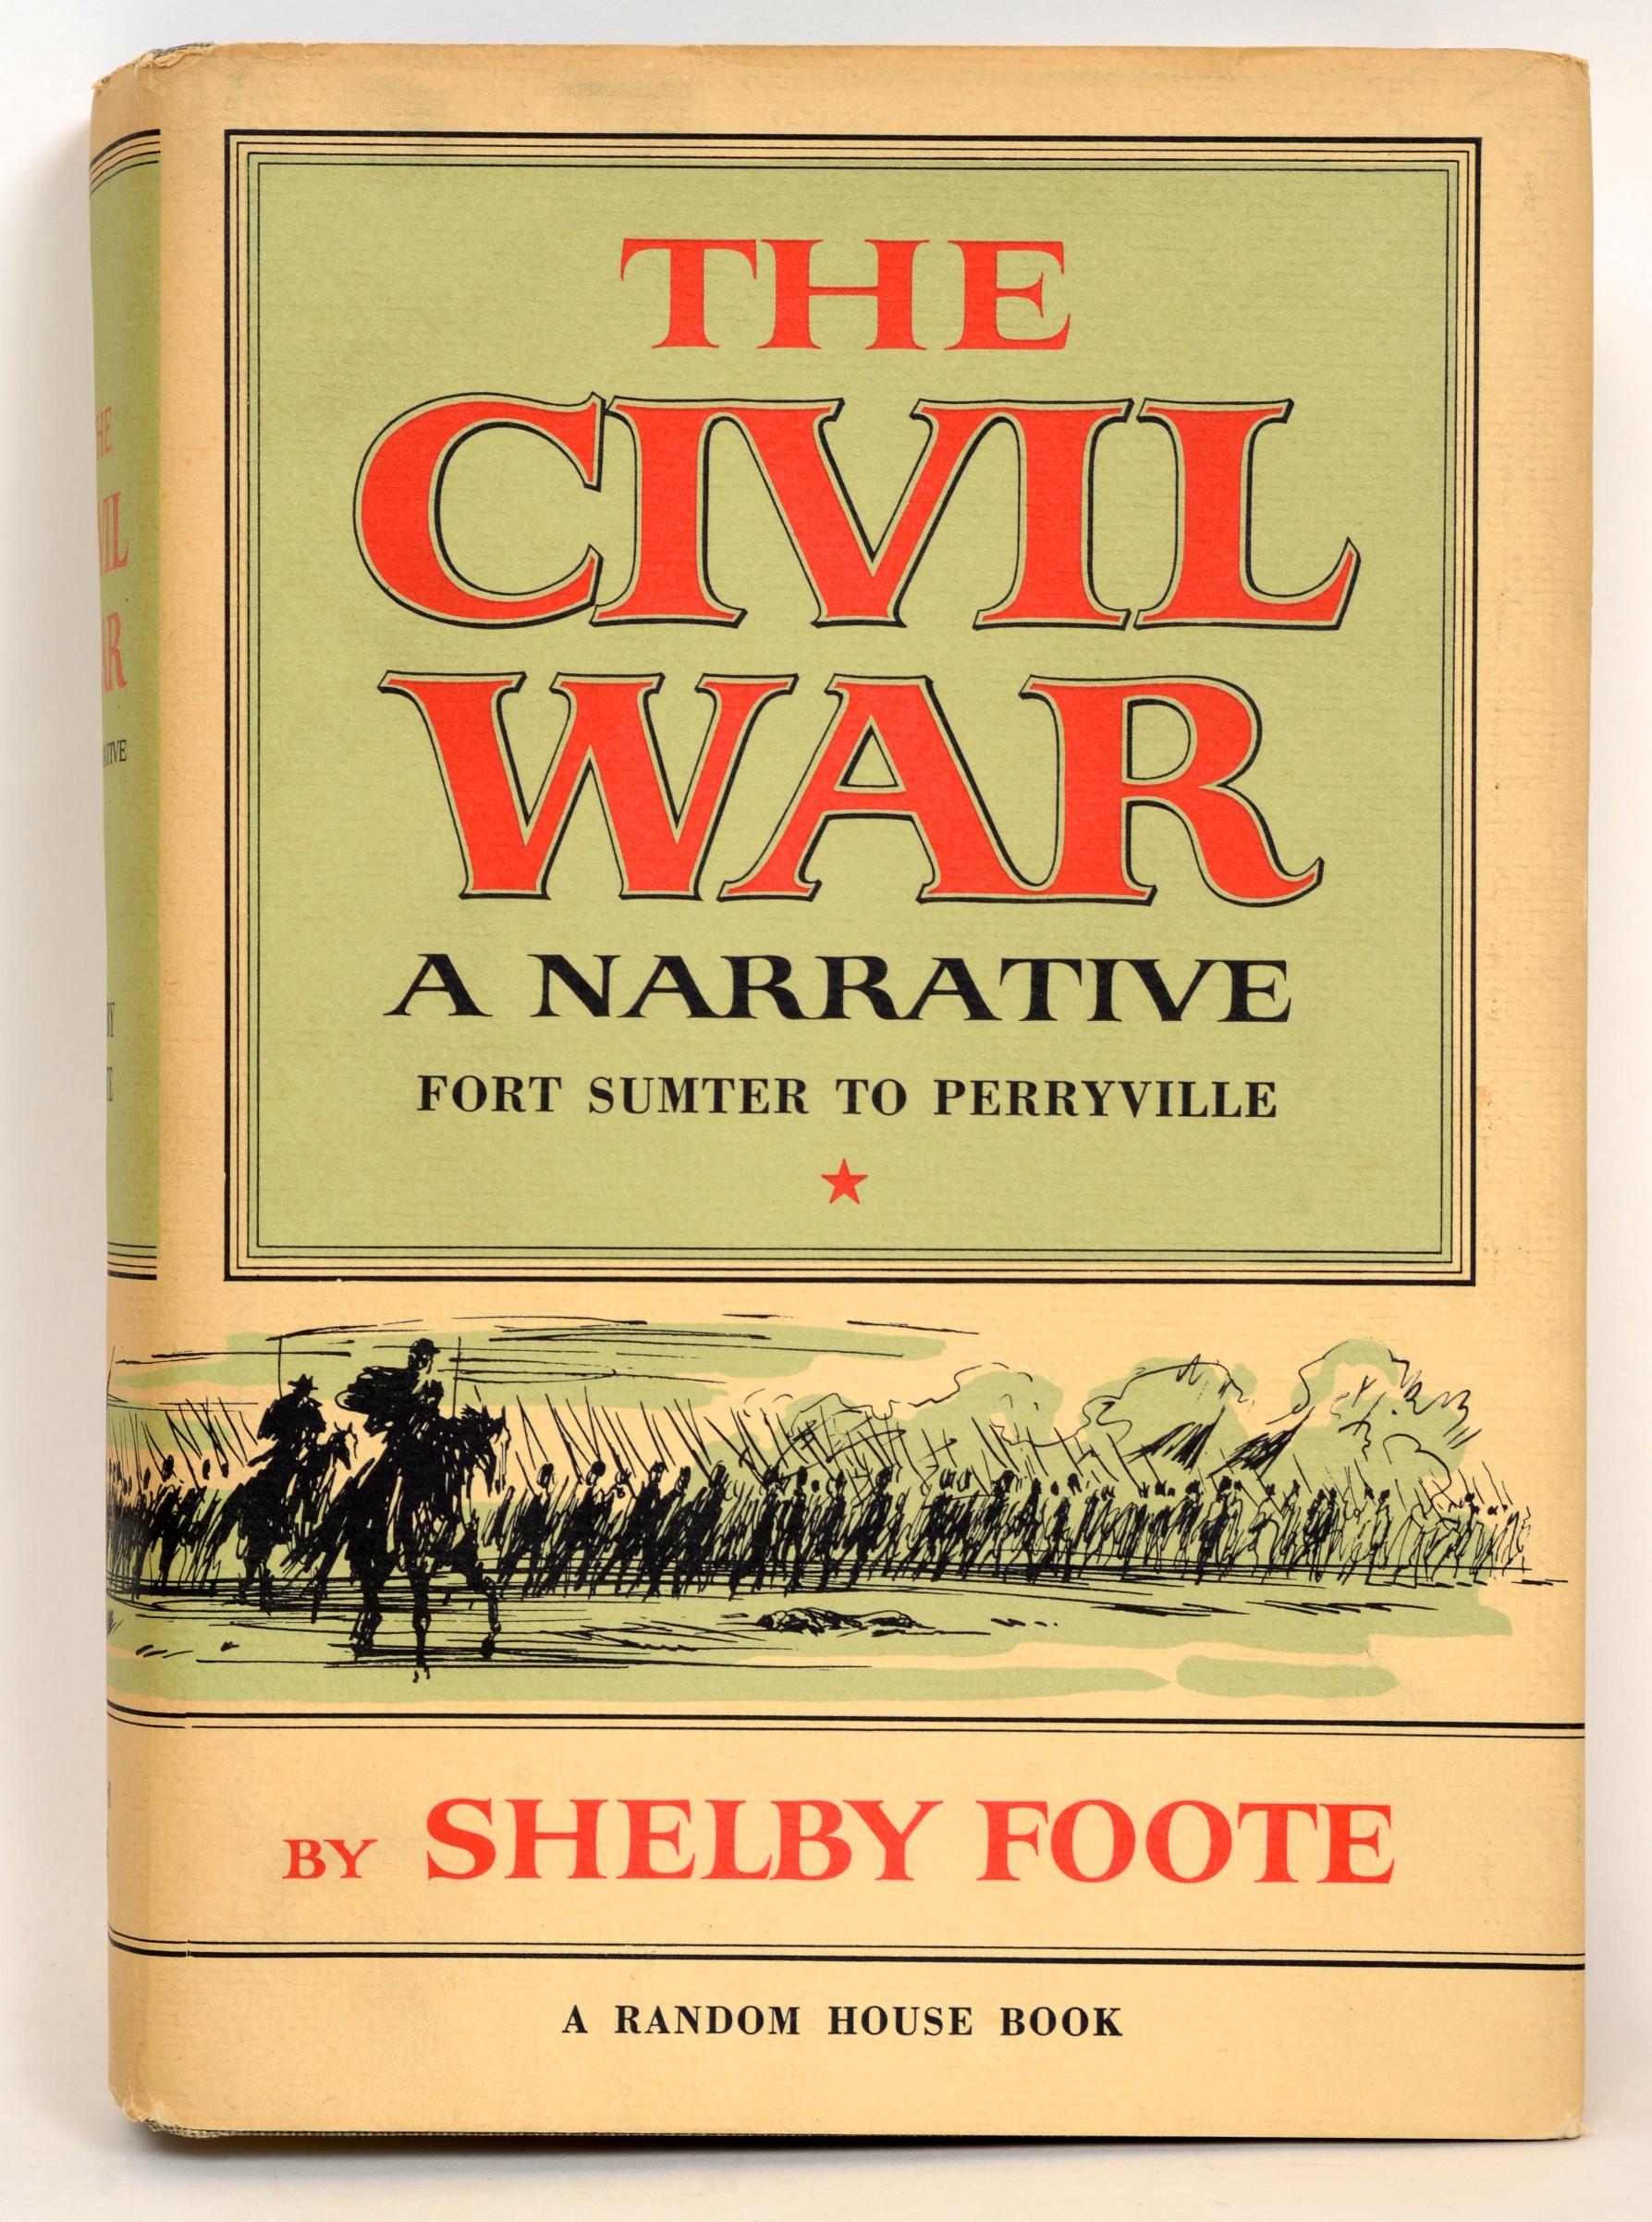 Civil War: A Narrative 3 Vol. Set (Fort Sumter to Perryville; Fredericksburg to Meridian; Red River to Appomattox) by Shelby Foote. New York: Random House, 1958-74. Set of 3, hardcovers with dust jackets. Volume 1: First edition hardcover with dust